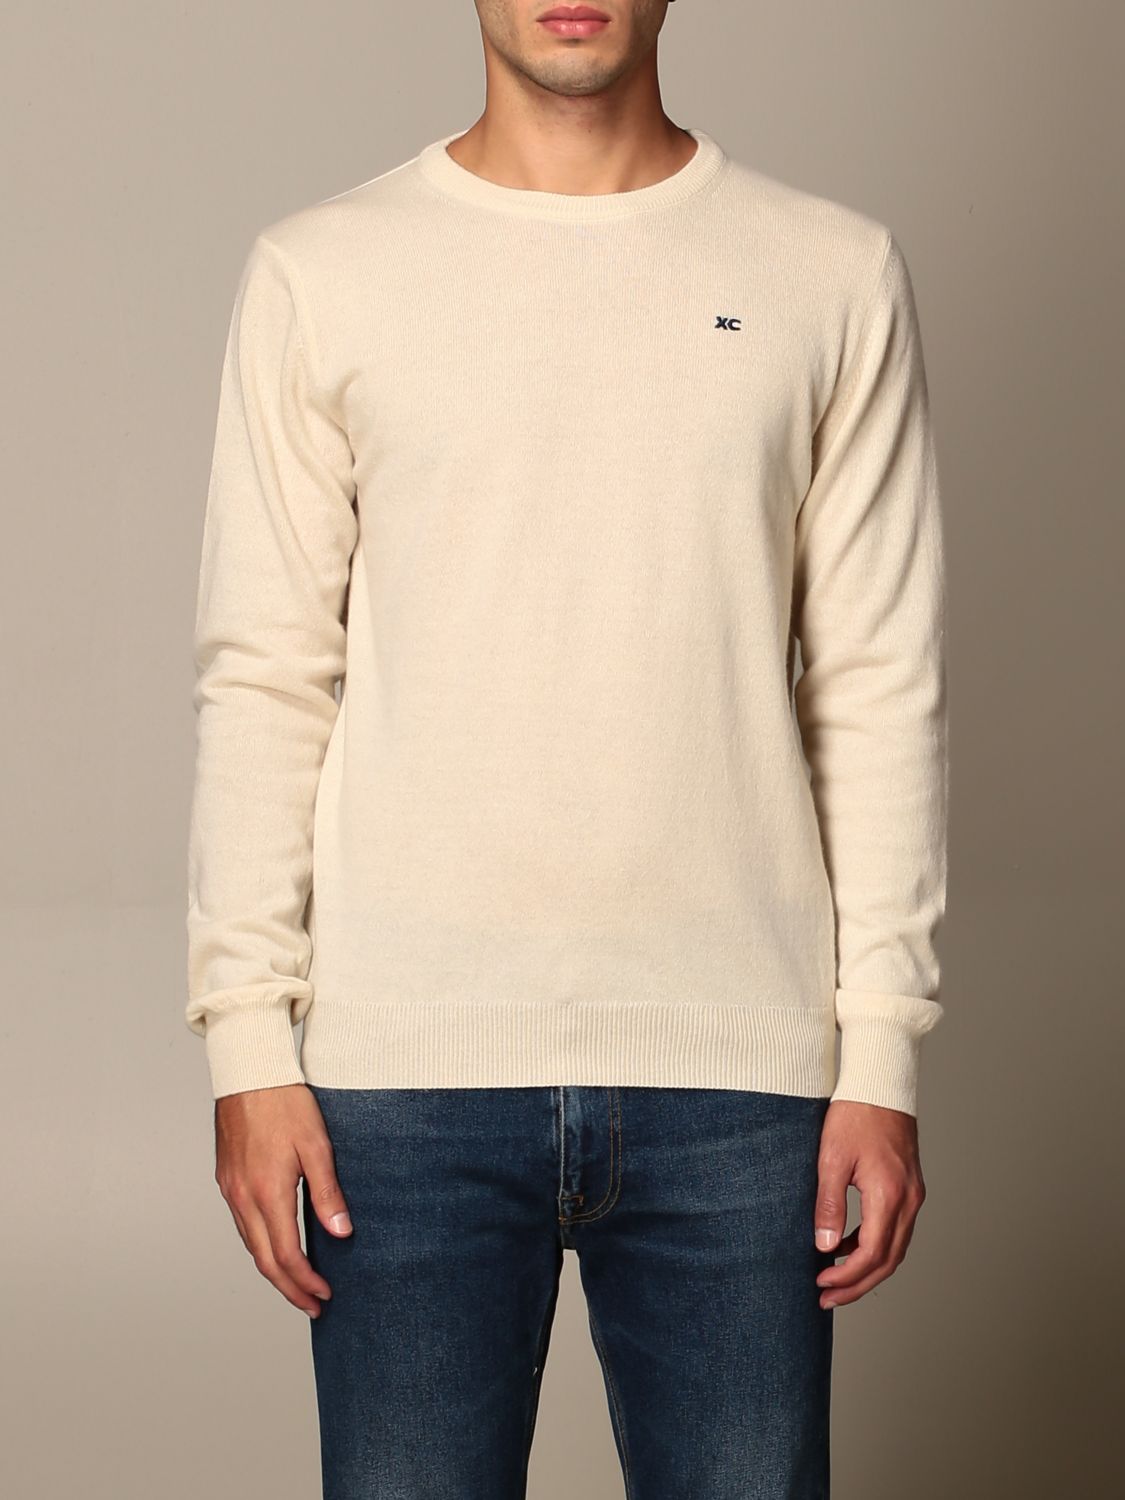 Xc Outlet: sweater in basic eco cashmere with logo - Yellow Cream | Xc ...